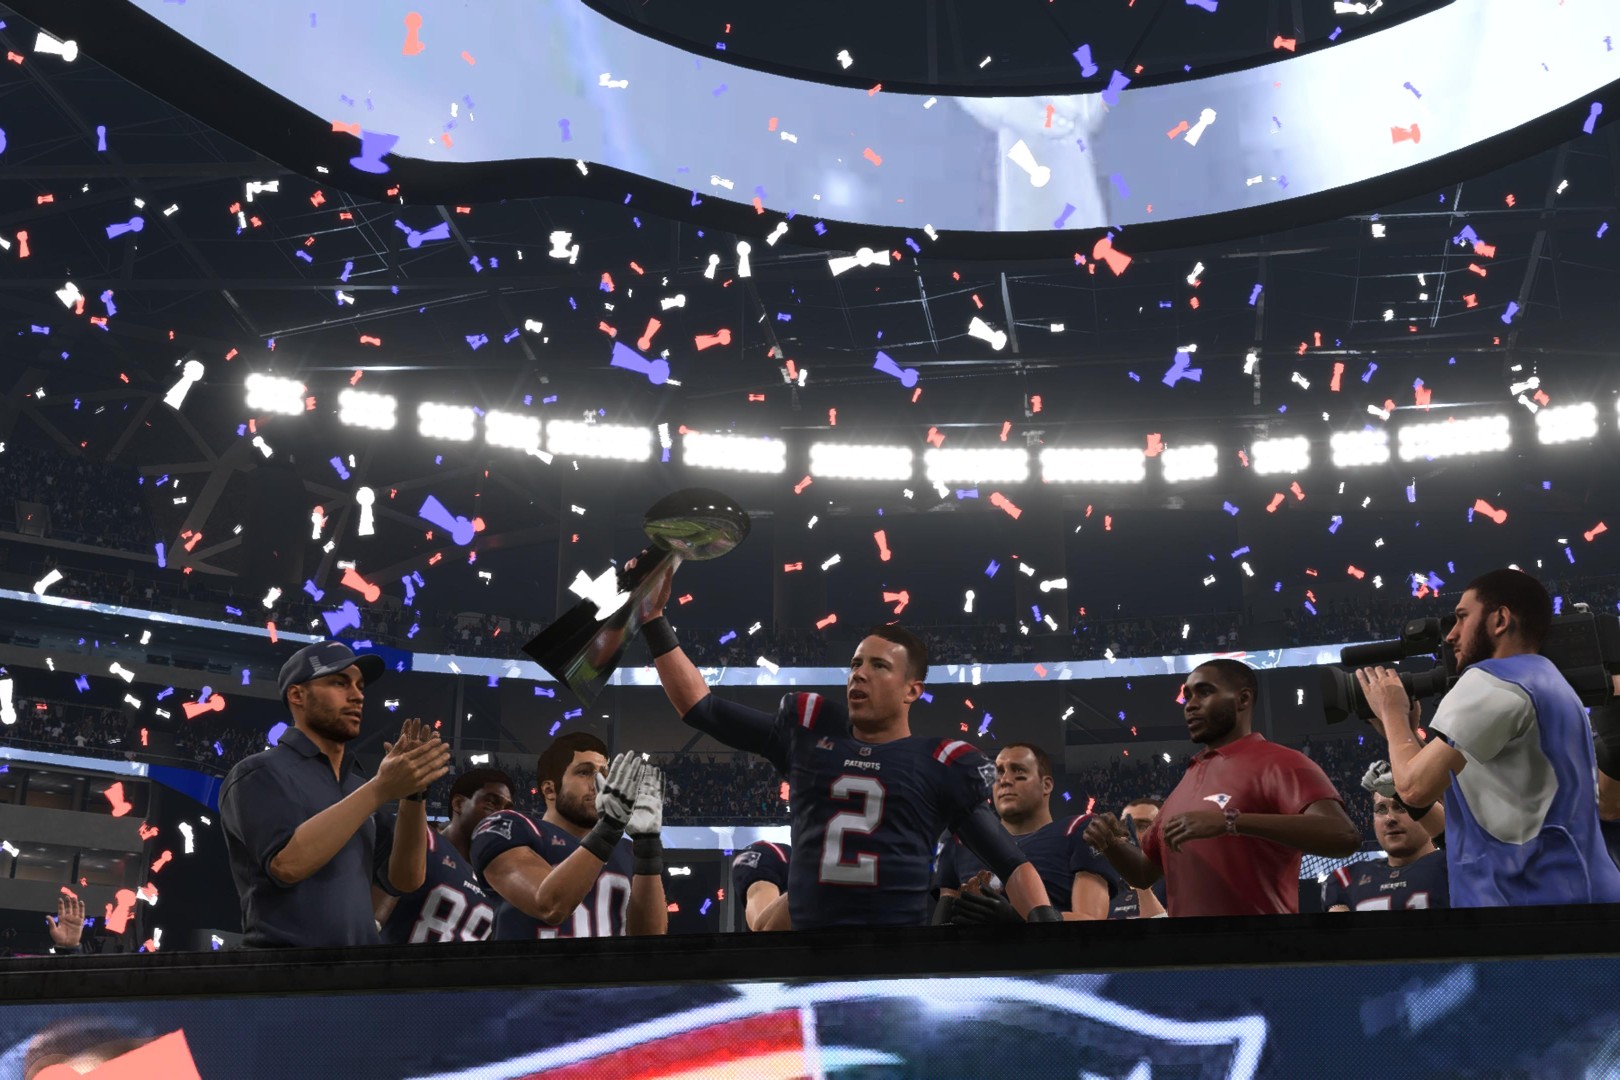 Won my first Super Bowl in the MVP division : r/MaddenUltimateTeam